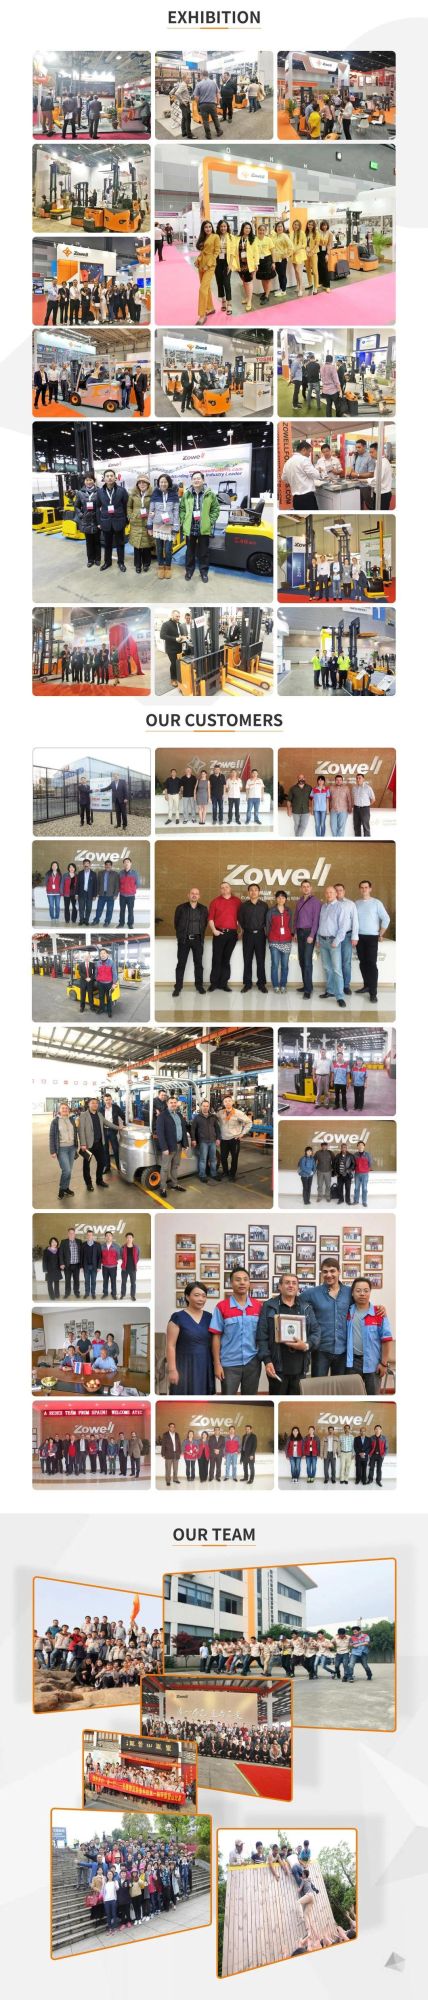 Zowell Standing on Type New Hot Selling 1.5 Ton Electric Straddle Stacker Forklift with 5500 mm Triplex Full Free Mast Lithium Battery